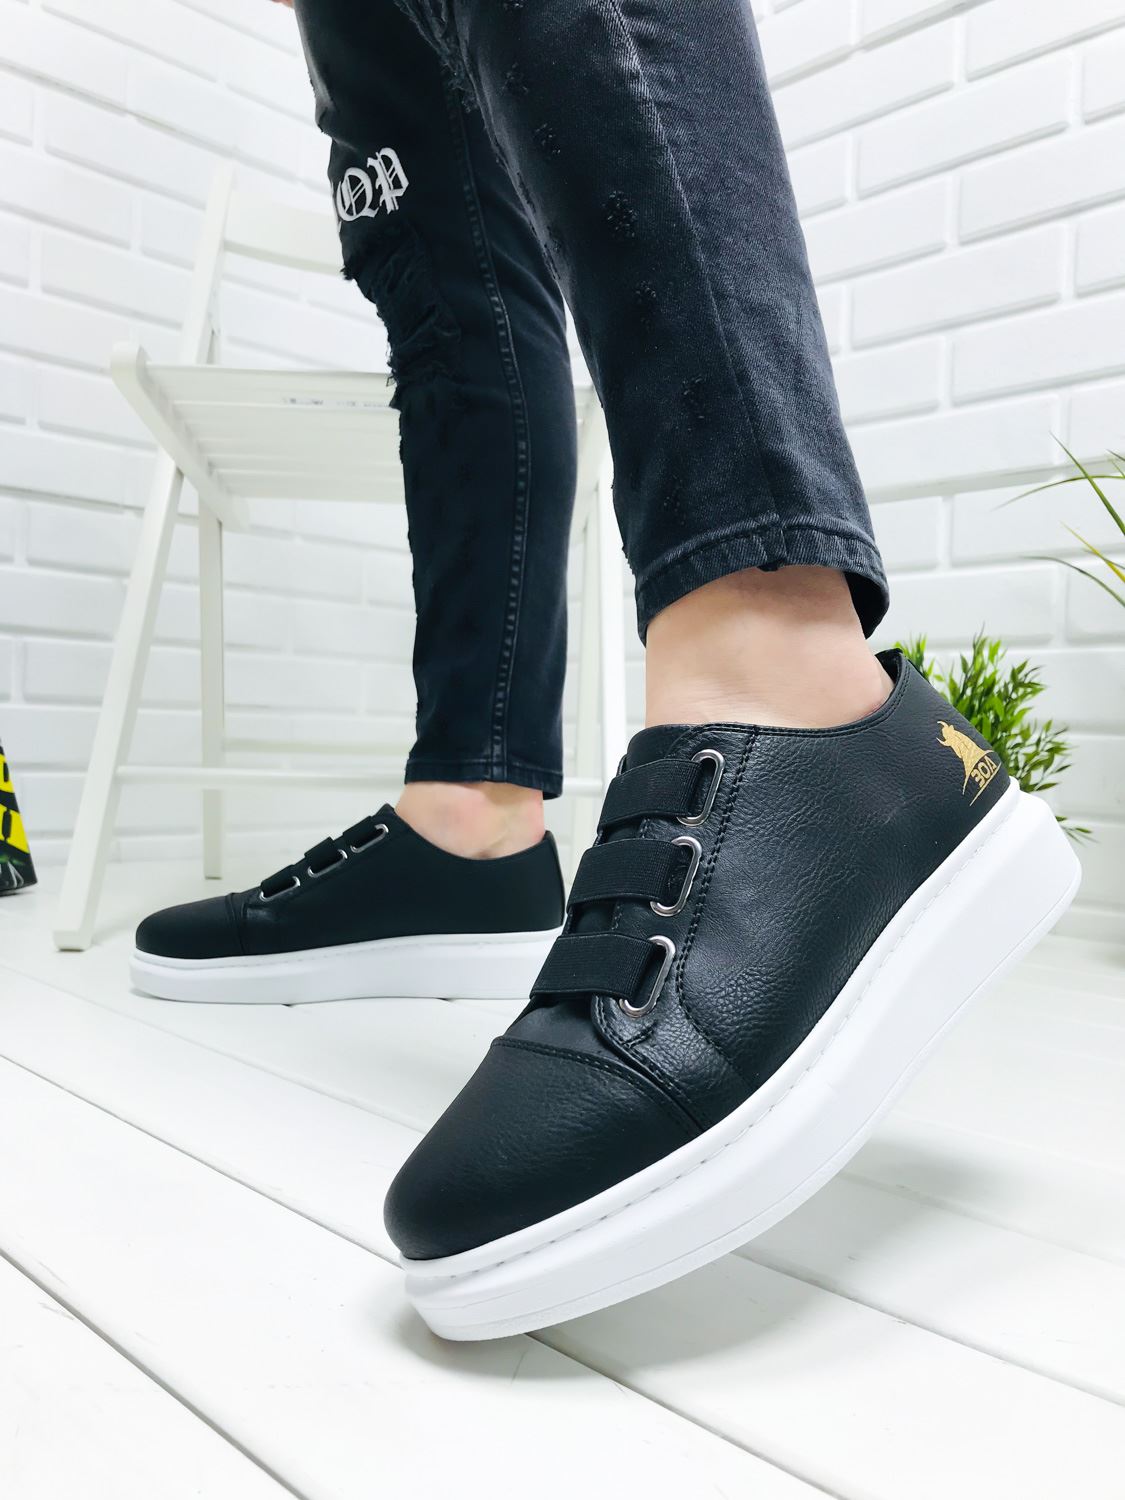 black sneaker with white sole